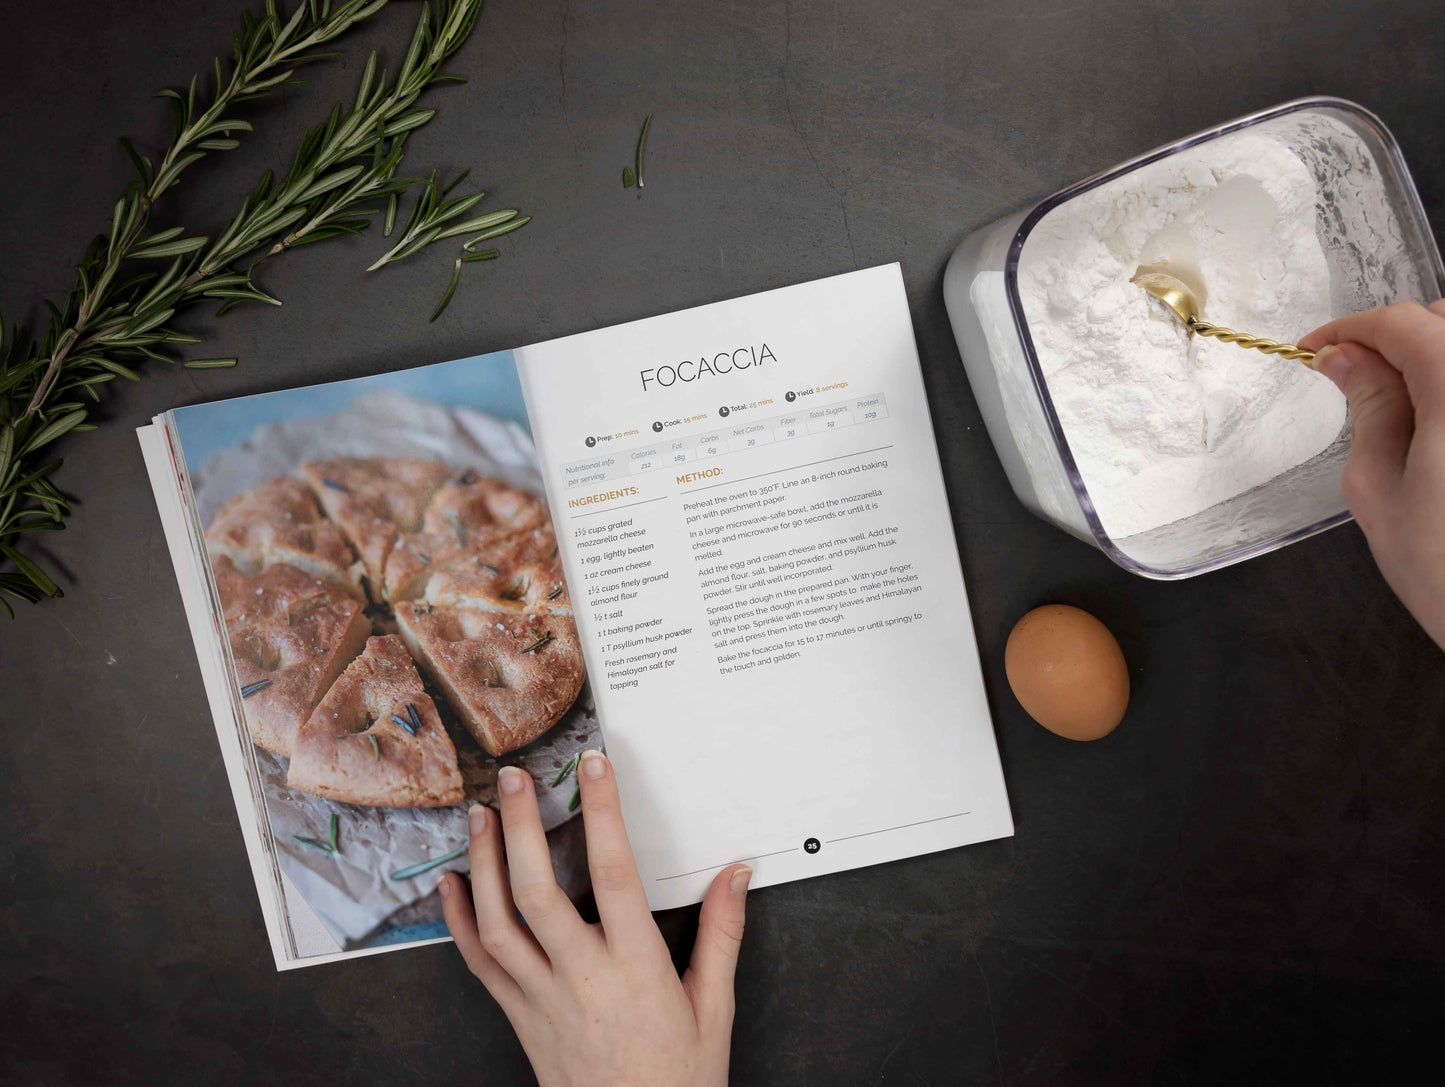 A woman's hand opens the keto carbs cookbook on a grey surface. A bowl of flour in the mixed, an egg and a sprig of rosemary can be seen.